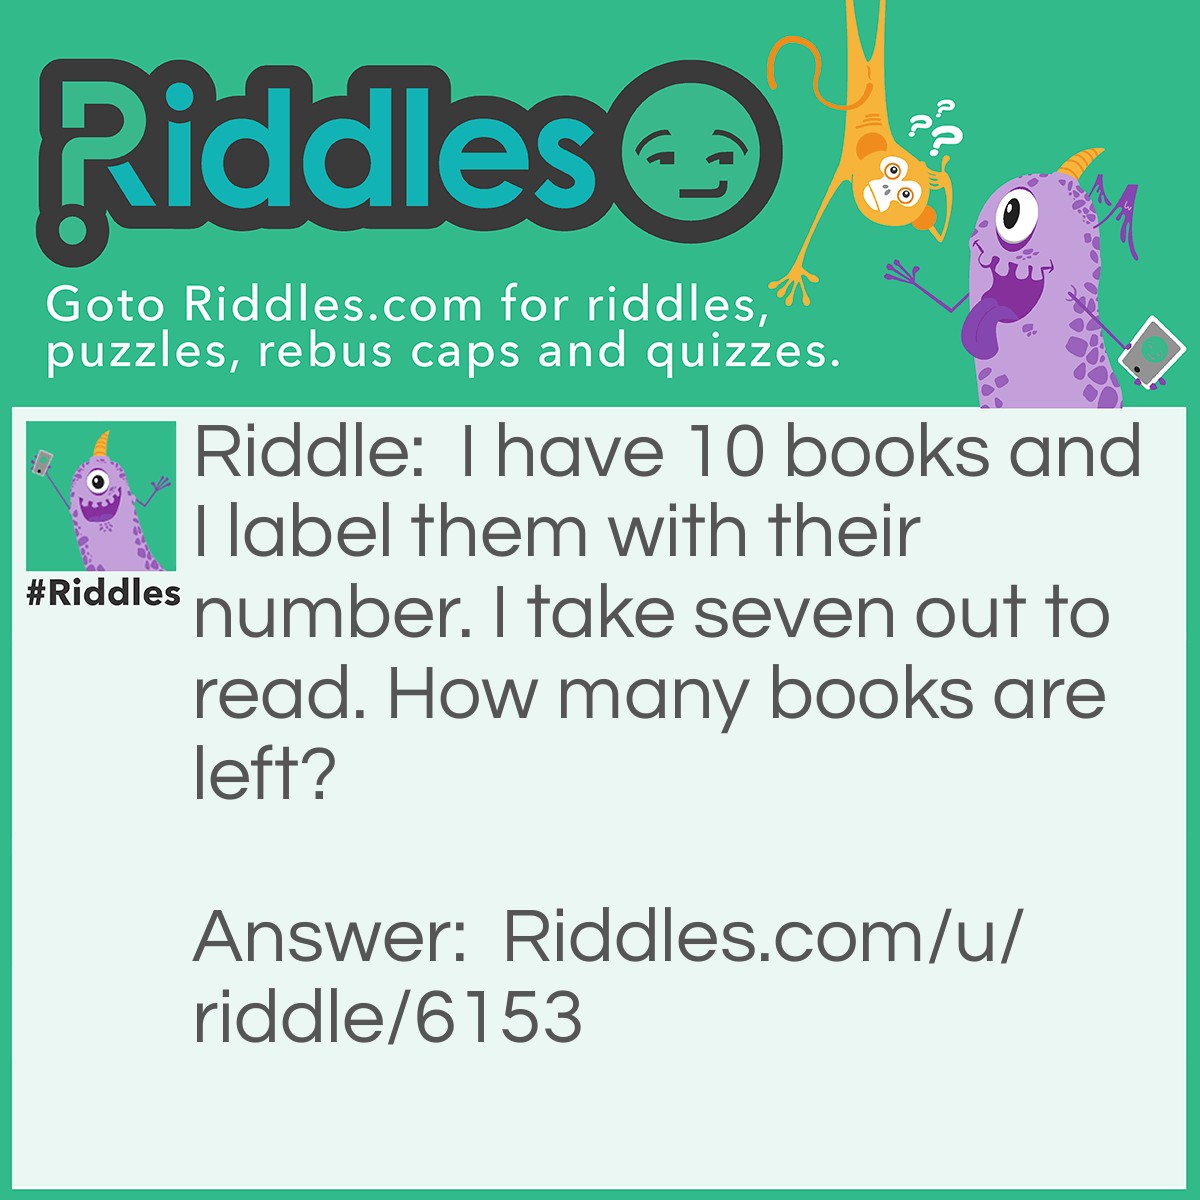 Riddle: I have 10 books and I label them with their number. I take seven out to read. How many books are left? Answer: 9! You have token the book with the label seven!